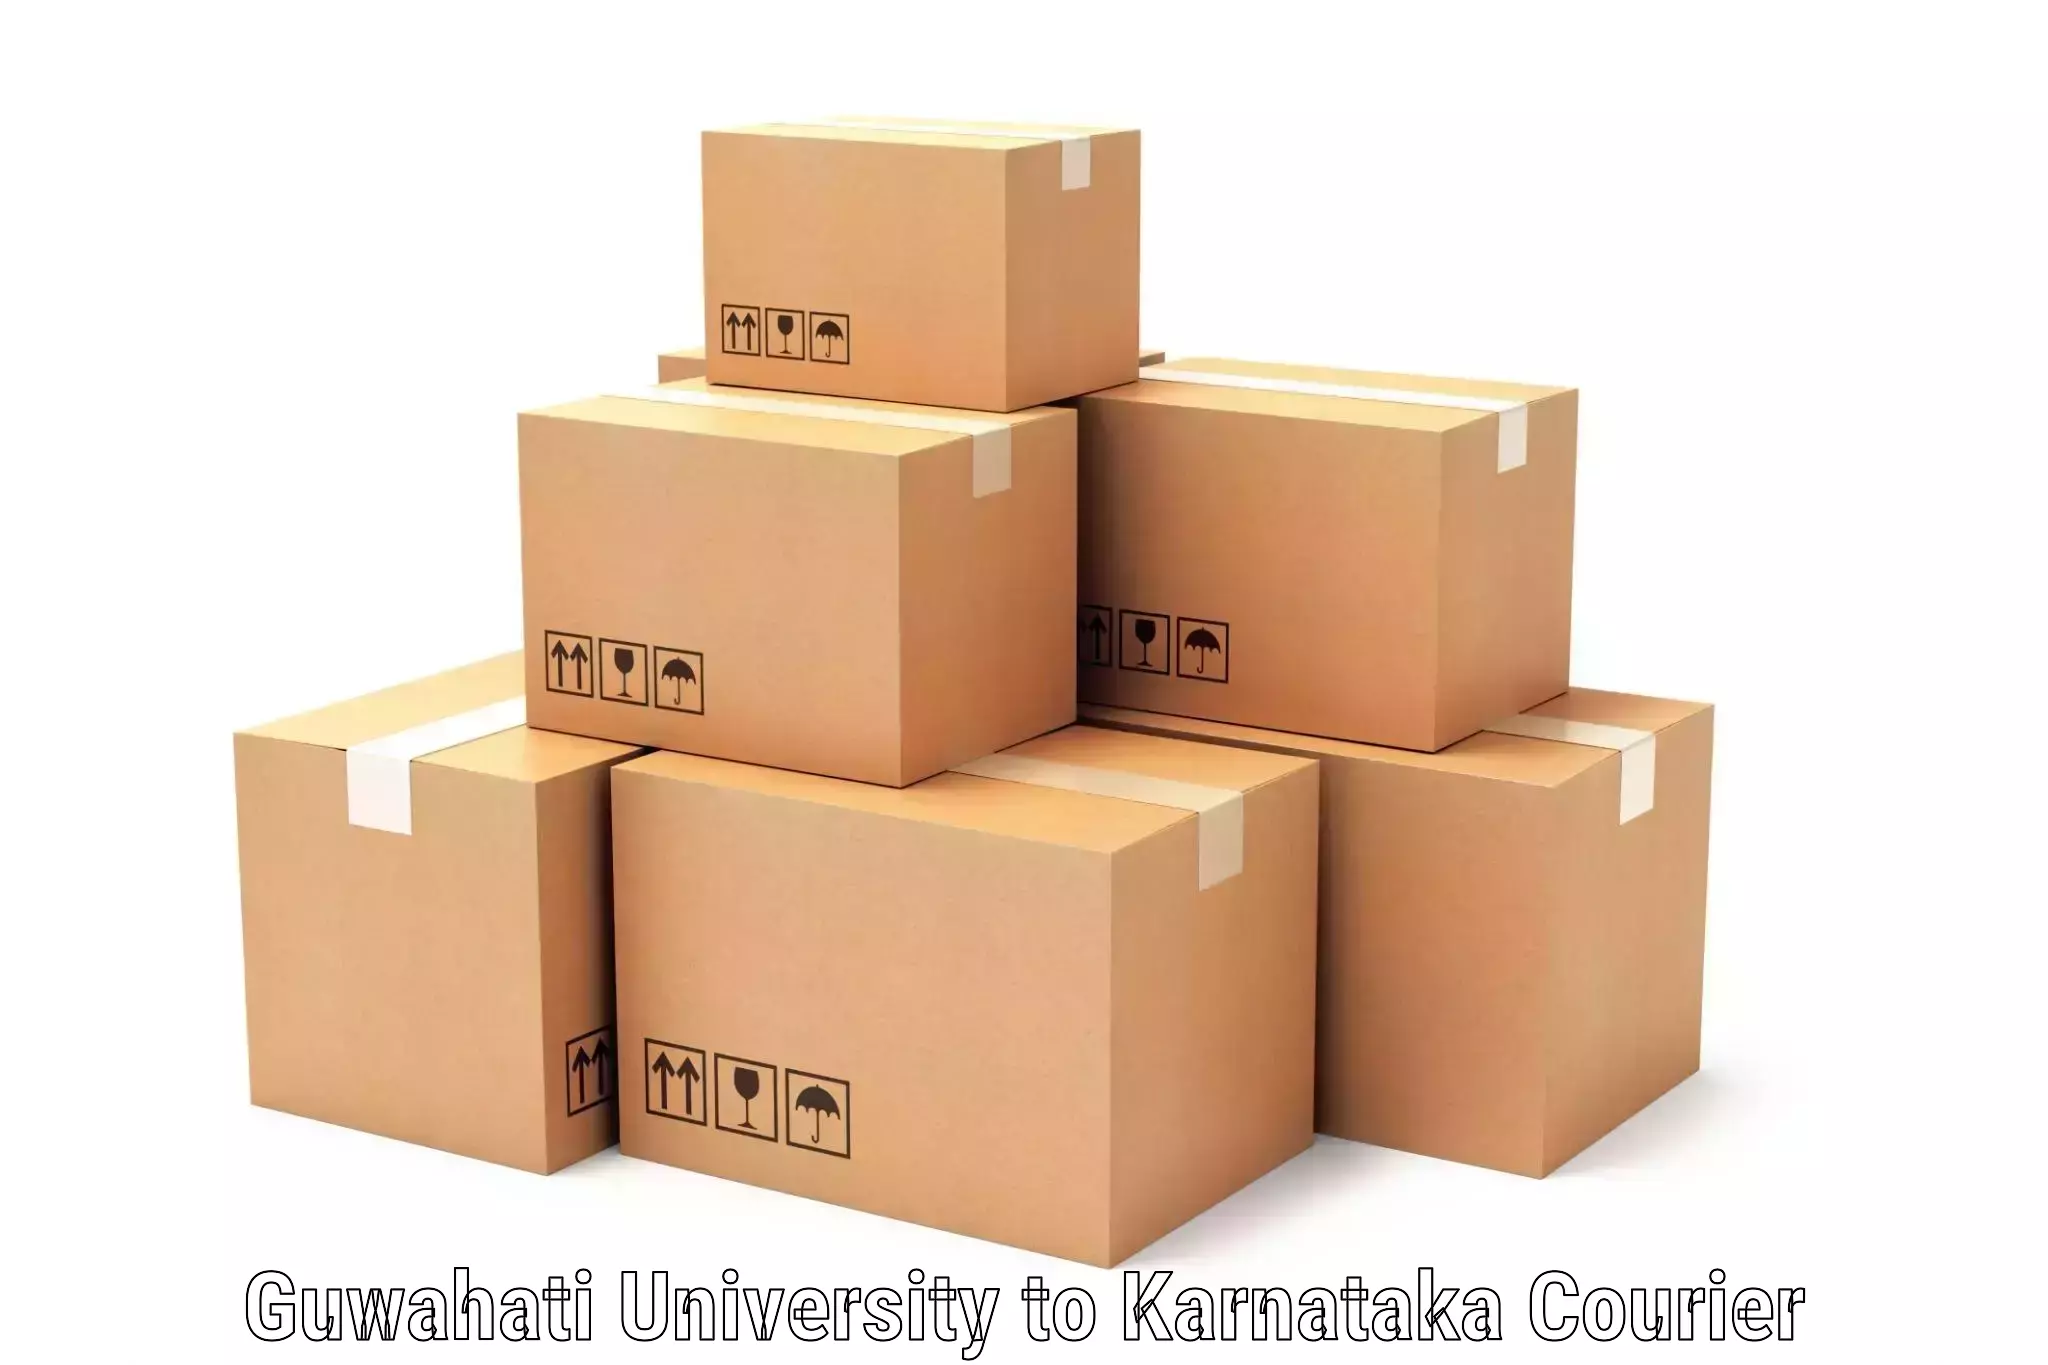 Customer-friendly courier services Guwahati University to Afzalpur